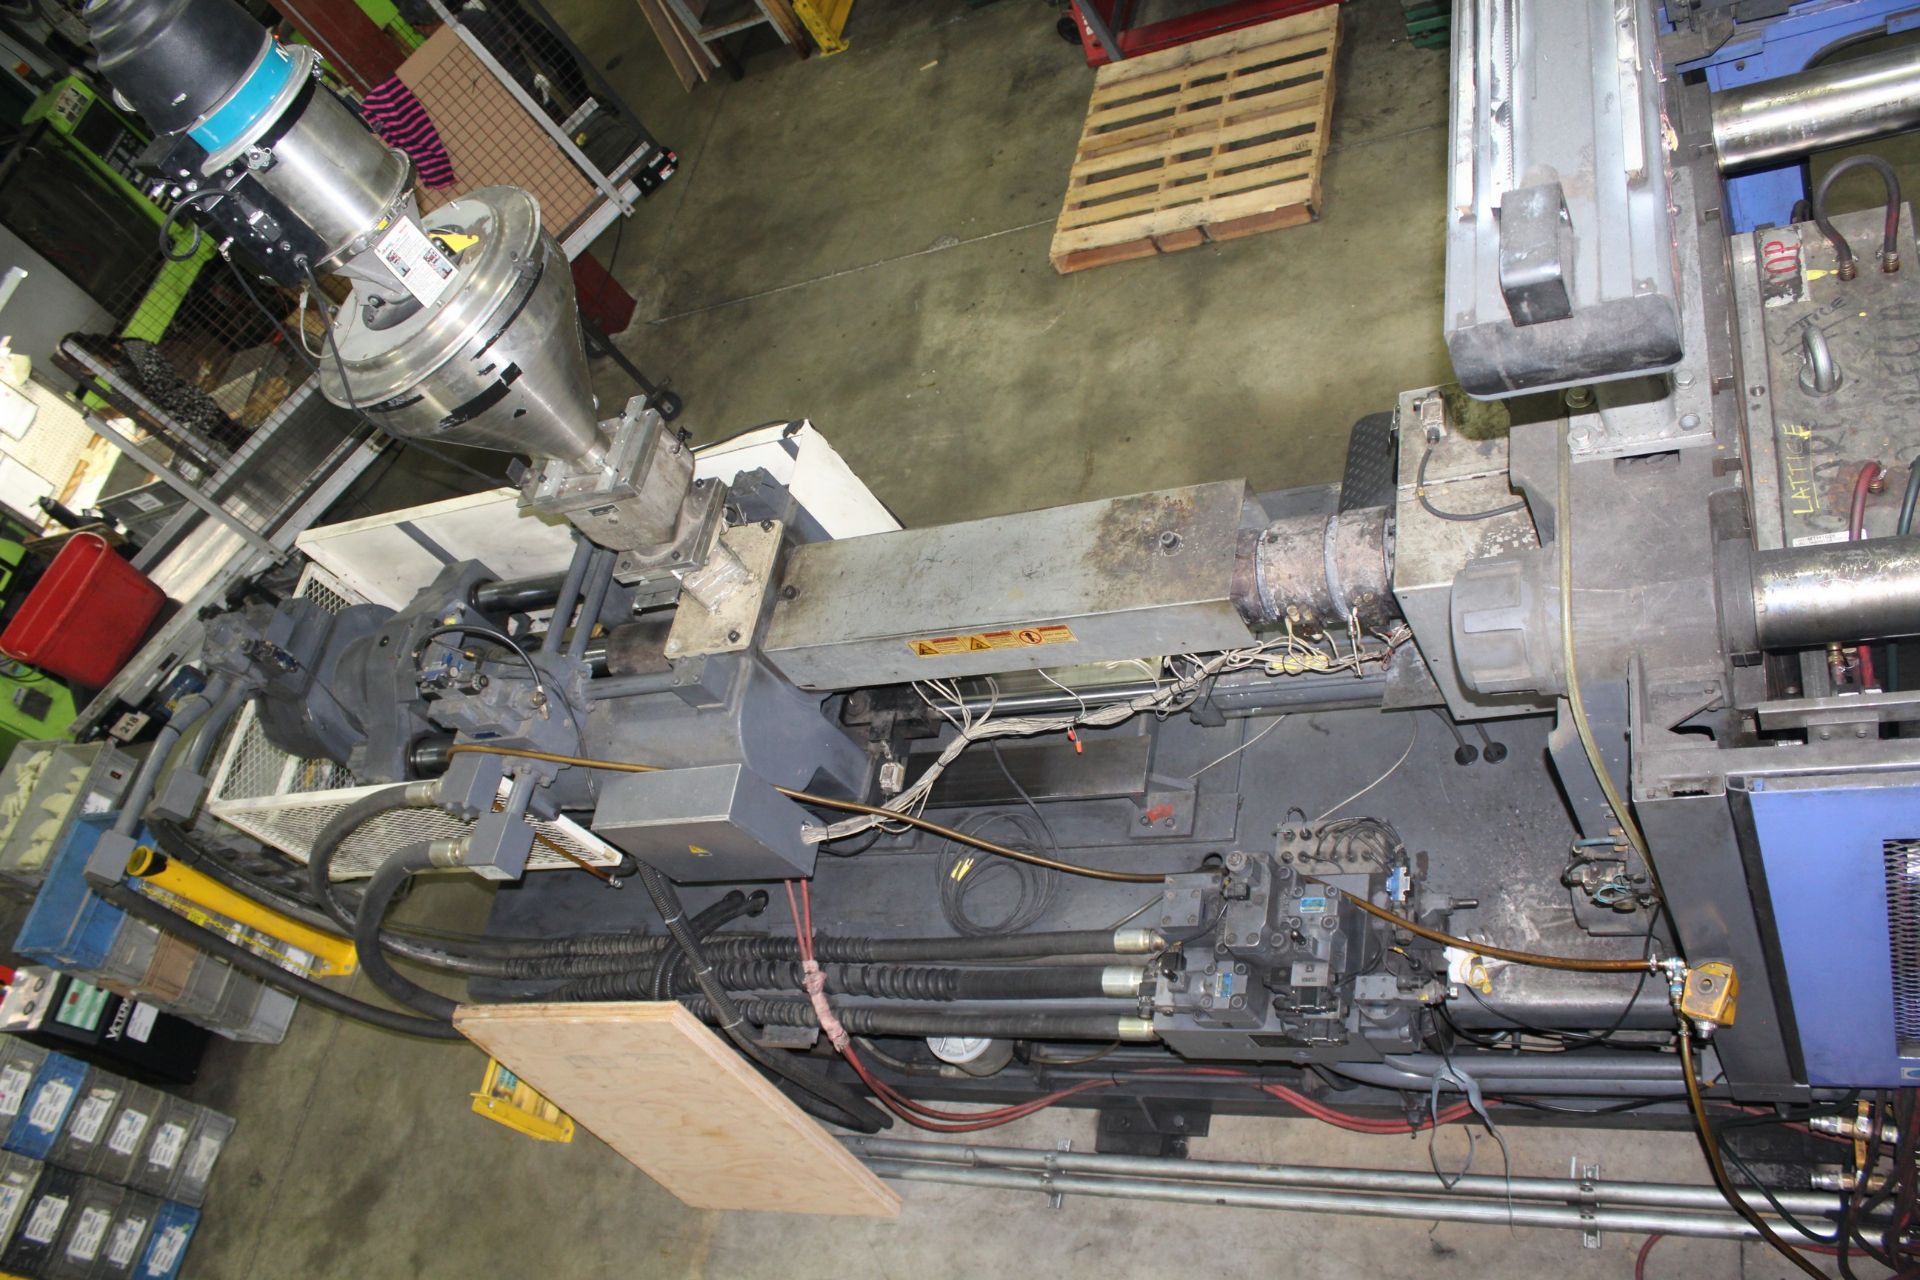 LG GOLD STAR 500H INJECTION MOLDER, 500-TON CAP. - Image 13 of 38